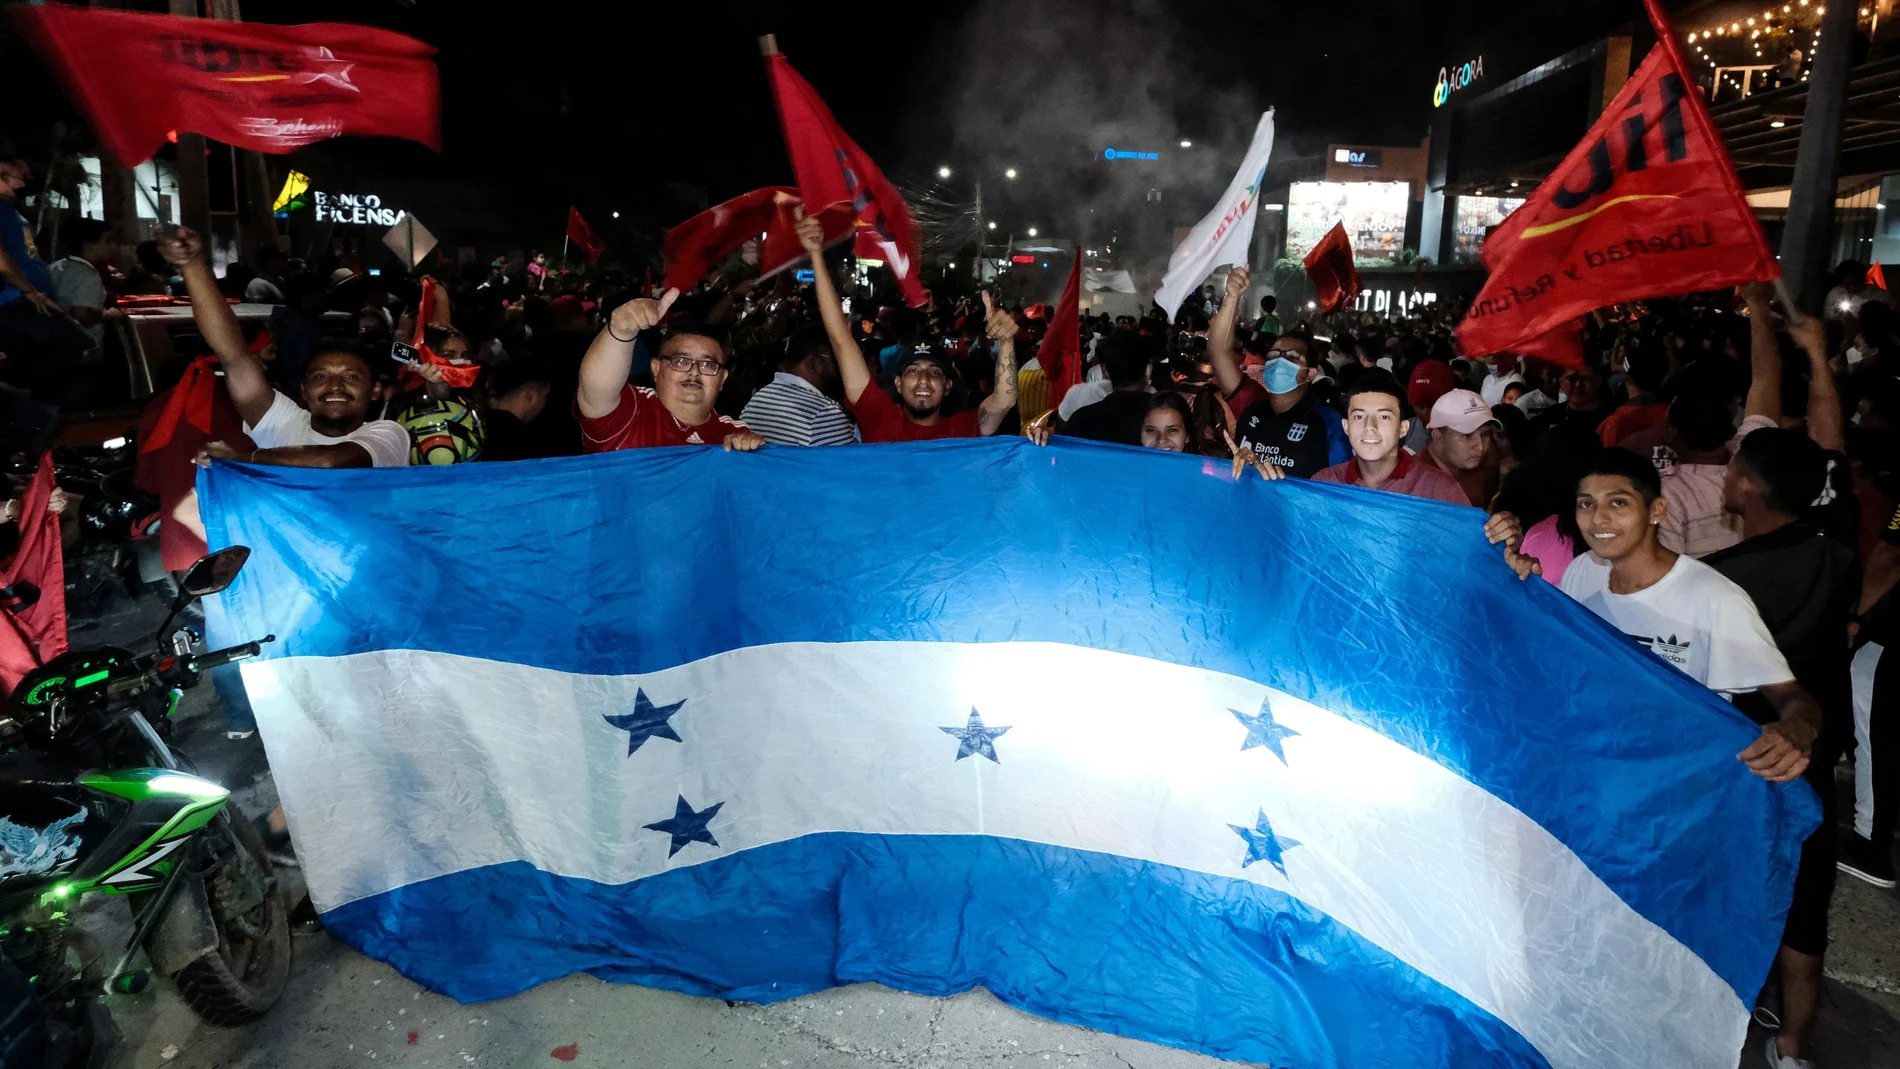 Supporters of the Liberty and Refoundation Party (LIBRE) hold an oversized flag of Honduras after the closing of the general election, in San Pedro Sula, Honduras November 28, 2021. Picture taken November 28, 2021. REUTERS/Yoseph Amaya